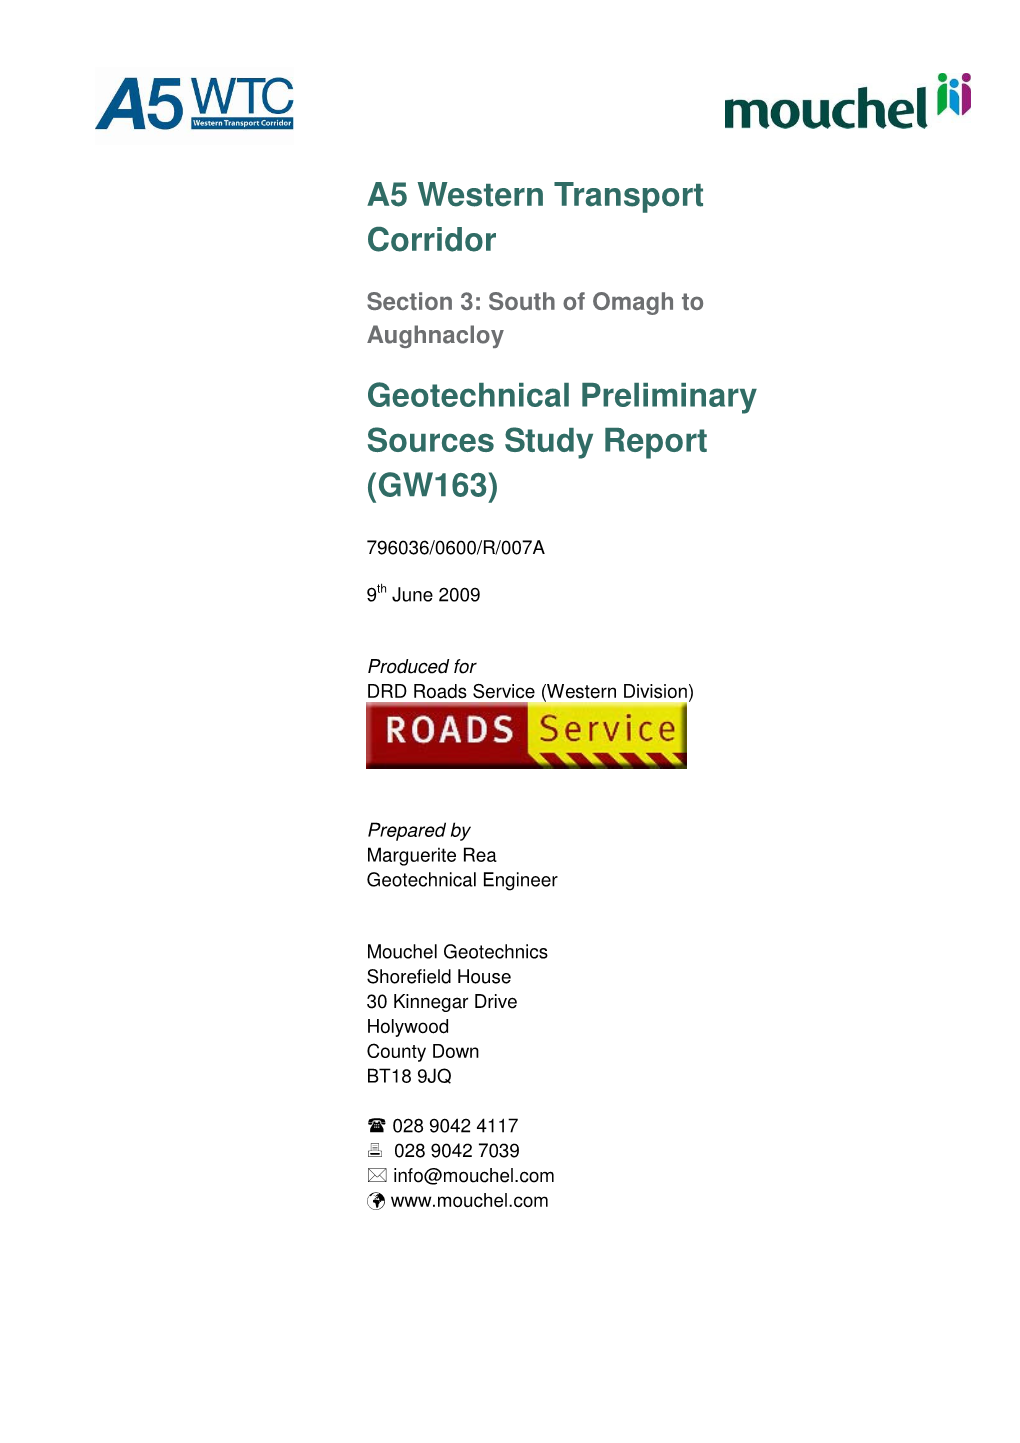 A5 Western Transport Corridor Geotechnical Preliminary Sources Study Report